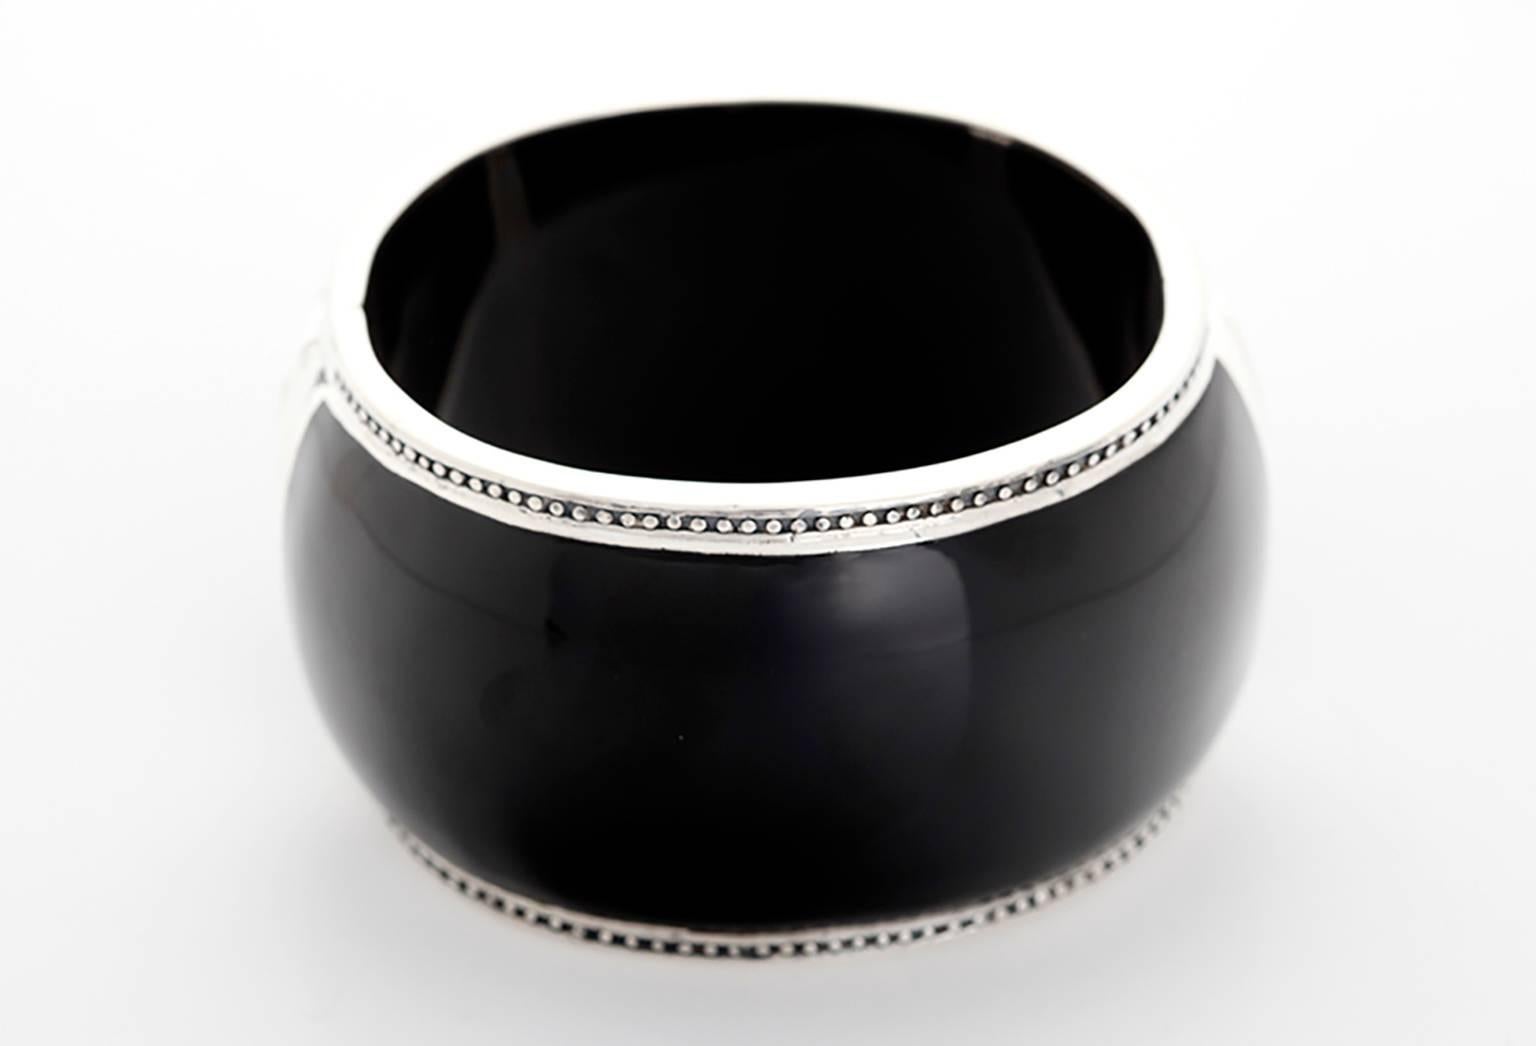 Miriam Salat Brown and White Topaz Medallion Cuff in Black Resin and Sterling Silver - This amazing Miriam Salat black resin and sterling silver cuff bracelet features a medallion with brown and white topaz. Cuff measures apx. 6-1/2 inches in